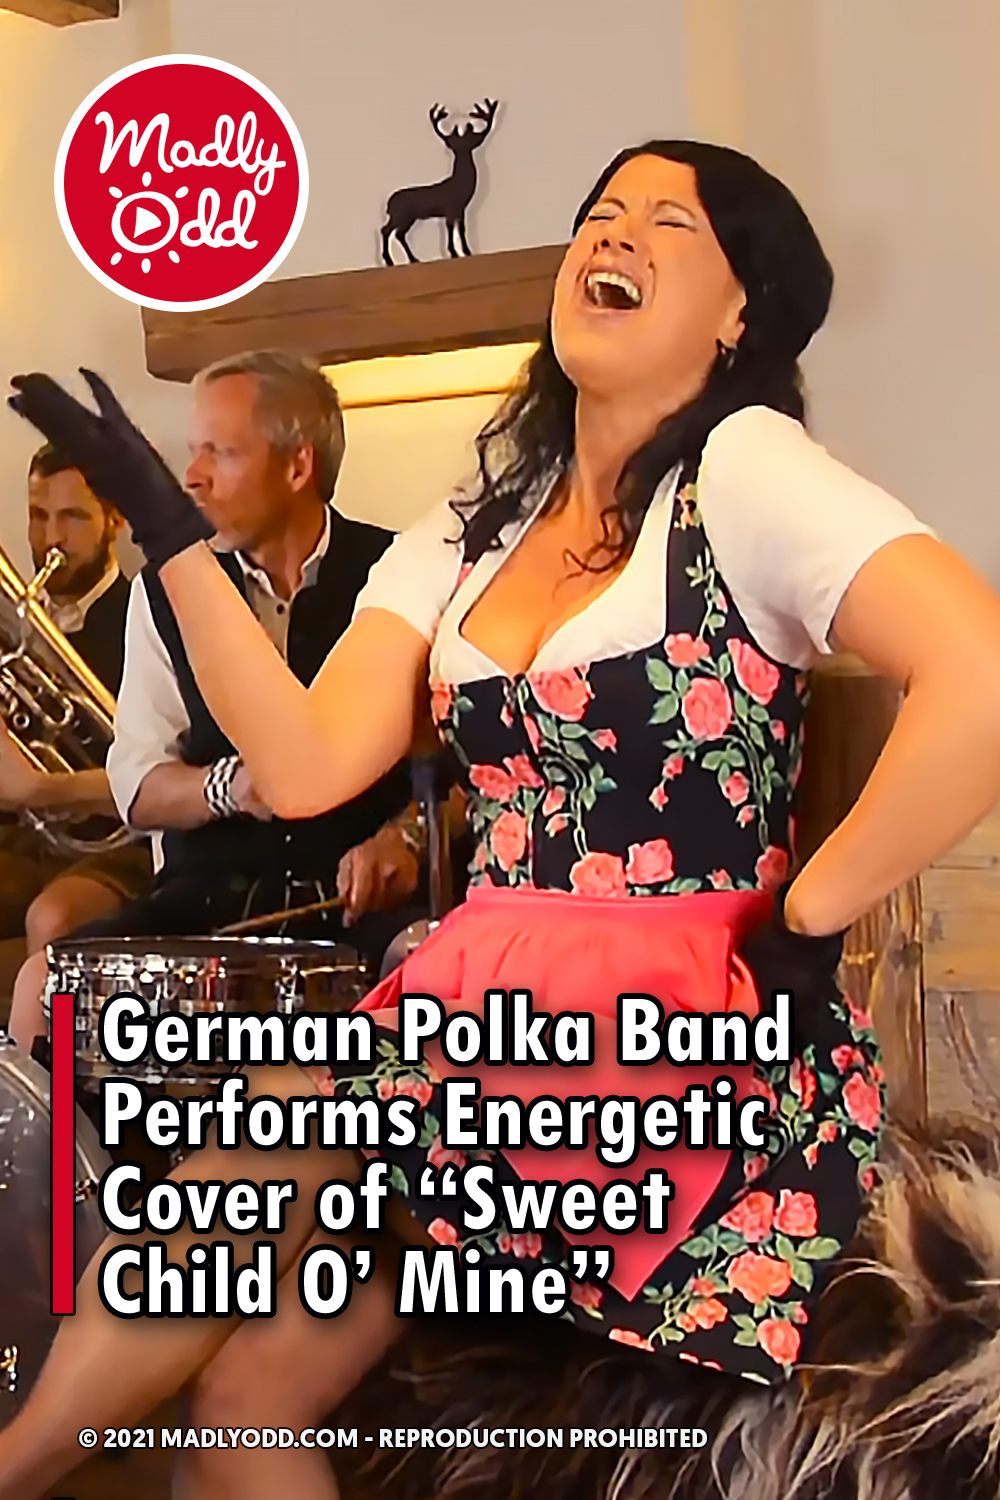 German Polka Band Performs Energetic Cover of “Sweet Child O’ Mine”